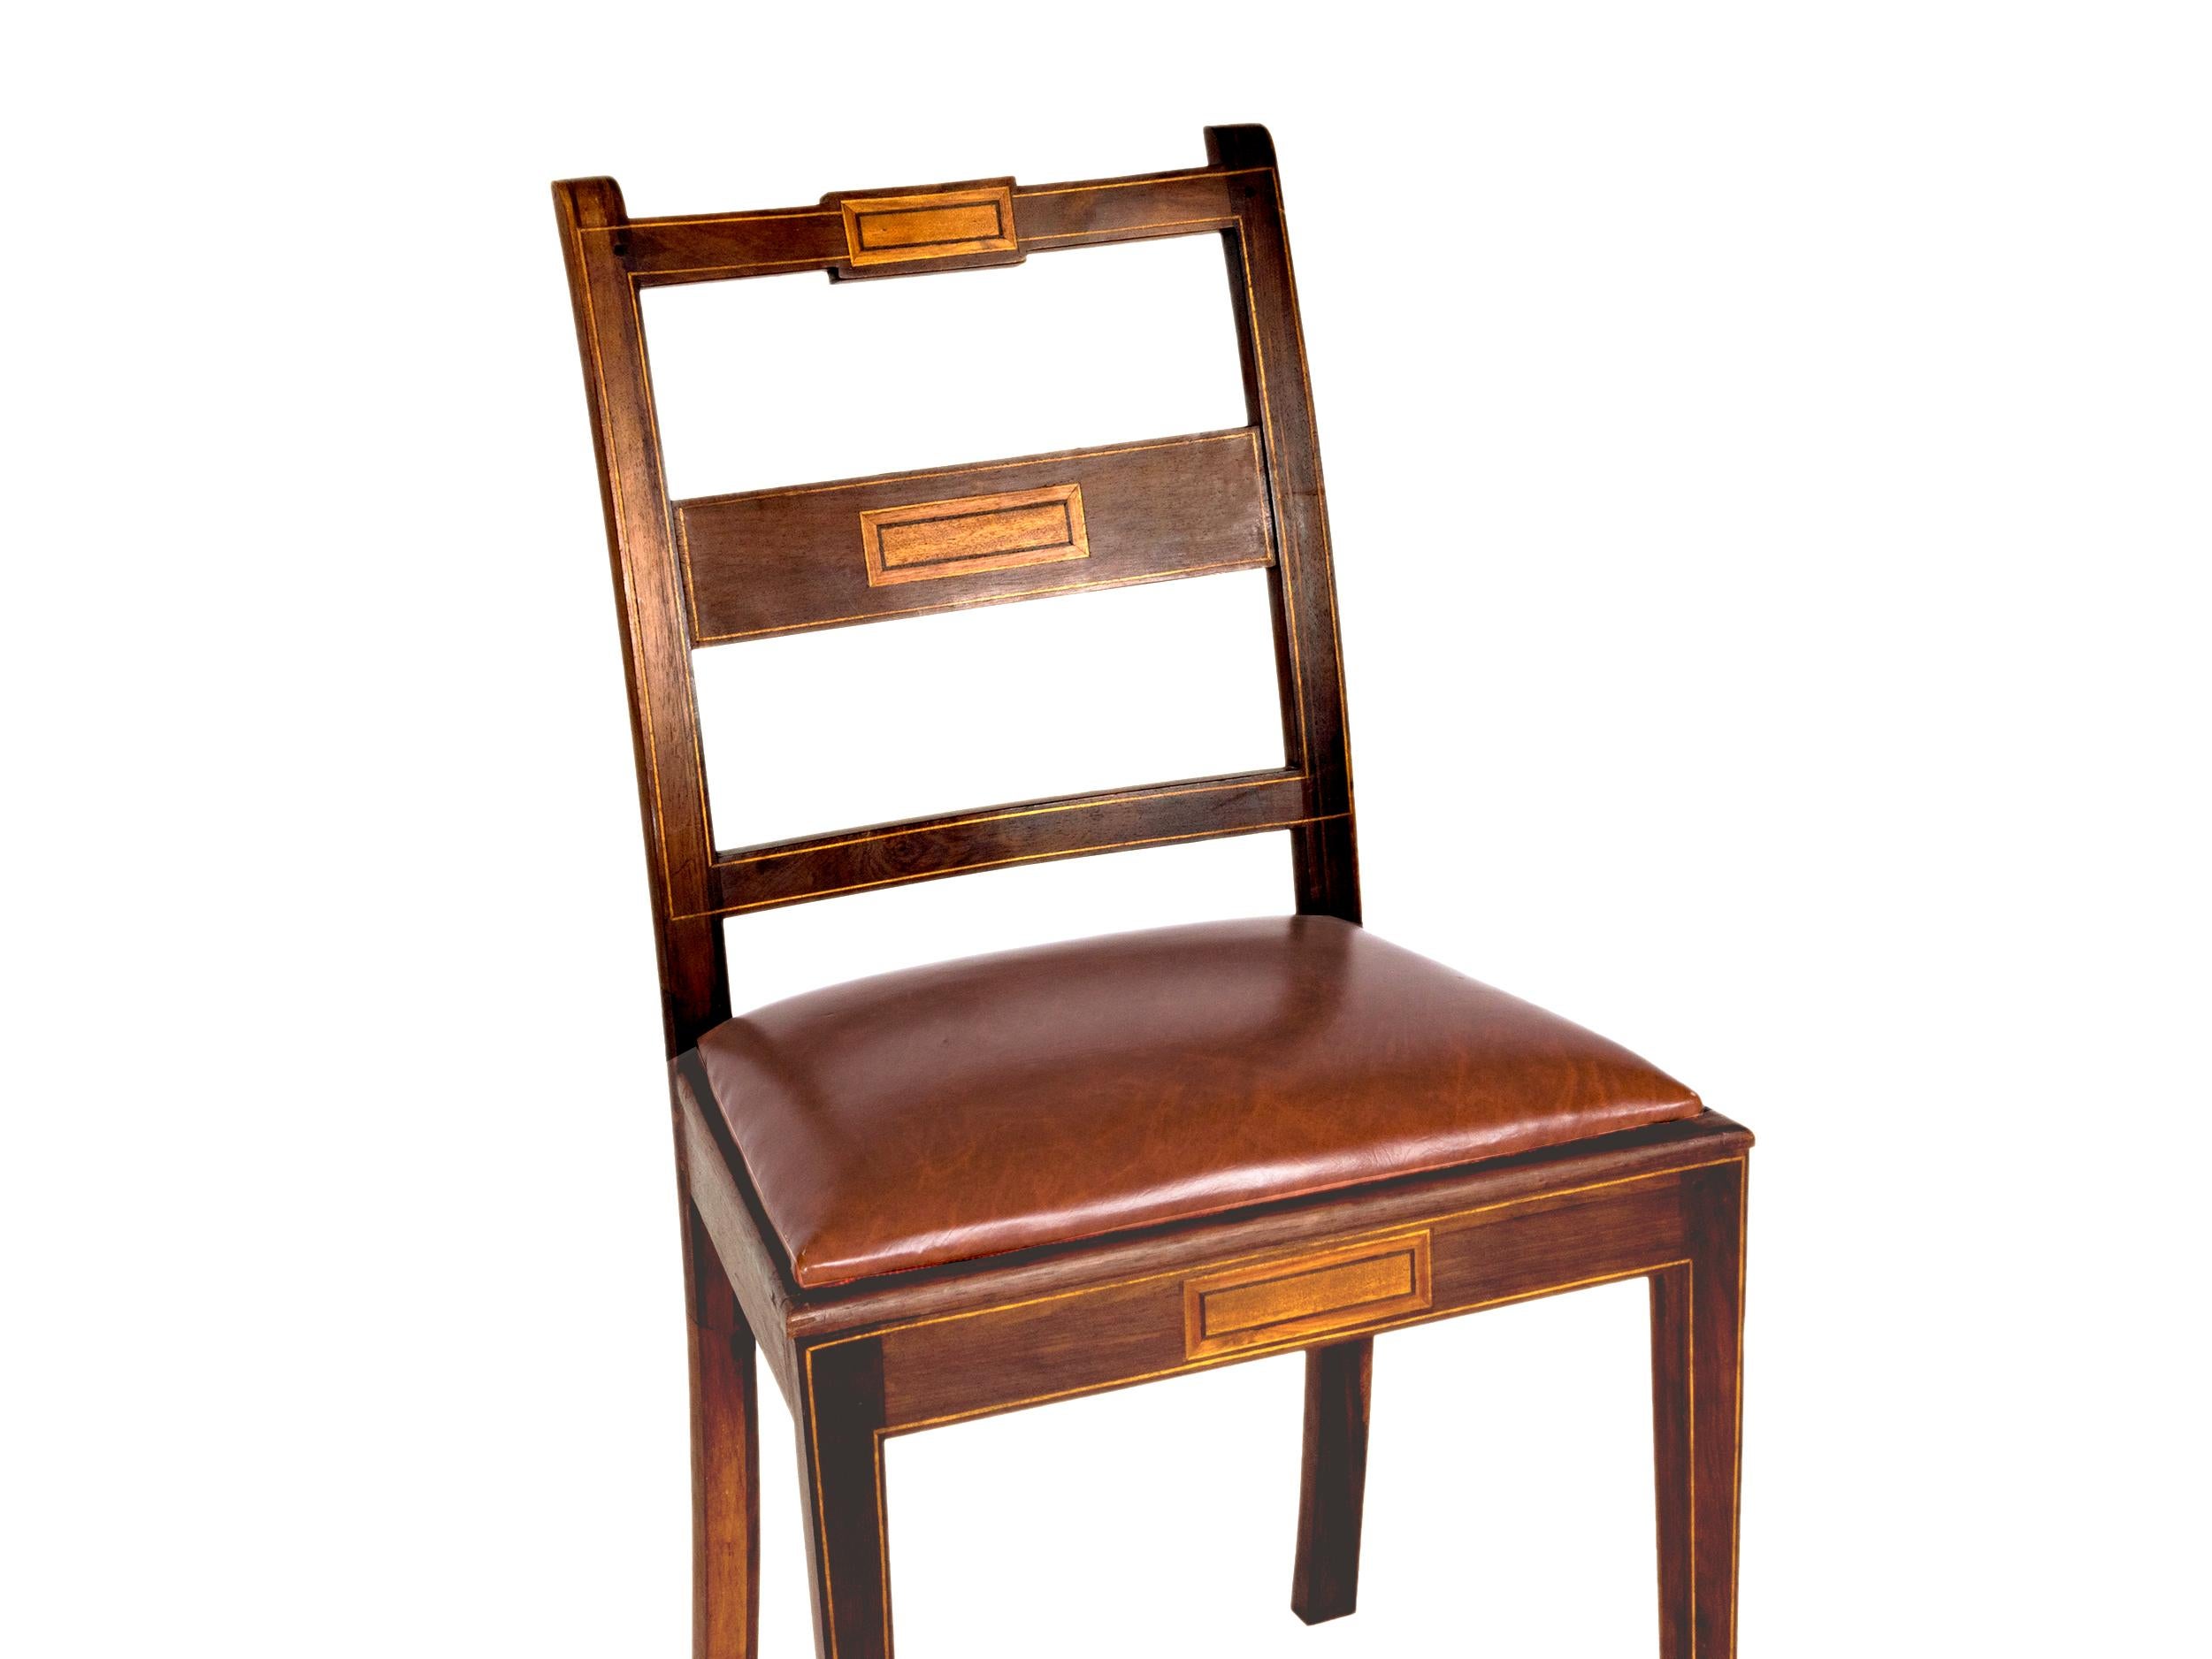 Set of Six Portuguese Chairs, Straw & Leather, 20th Century For Sale 1